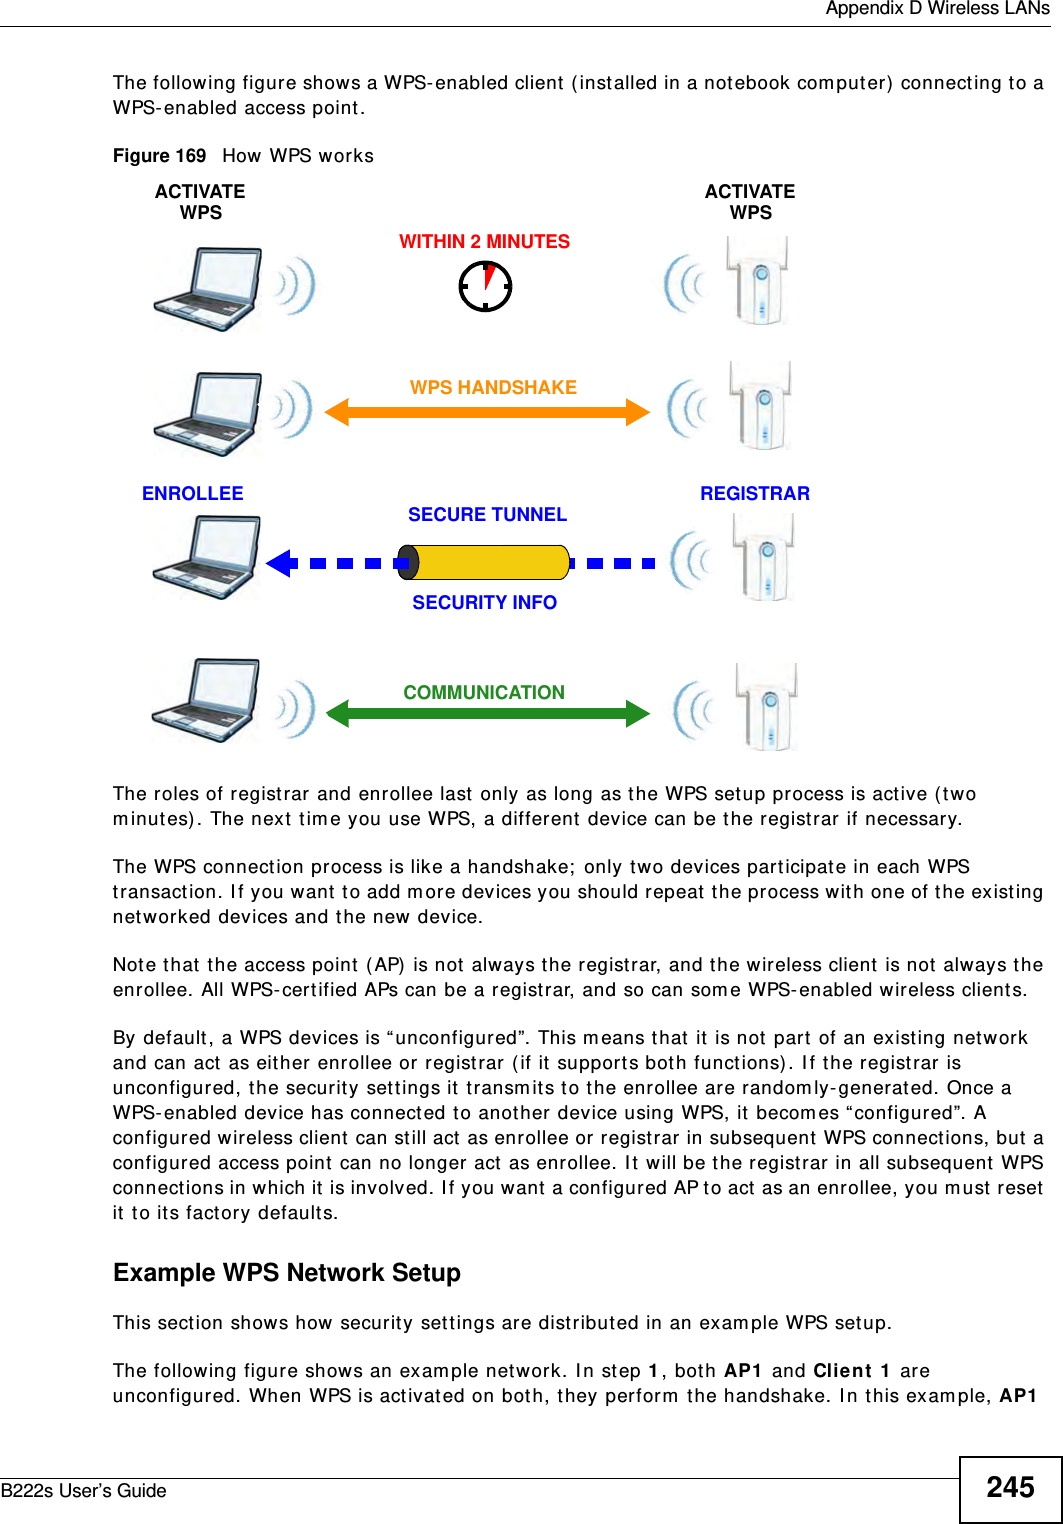  Appendix D Wireless LANsB222s User’s Guide 245The following figure shows a WPS- enabled client  ( inst alled in a notebook com put er)  connect ing t o a WPS- enabled access point .Figure 169   How WPS worksThe roles of registrar and enrollee last only as long as the WPS set up process is active ( t wo m inut es) . The next  t im e you use WPS, a differ ent  device can be t he regist rar if necessary.The WPS connect ion process is like a handshake;  only two devices part icipat e in each WPS transact ion. I f you want  t o add m ore devices you should repeat  t he process wit h one of t he exist ing networked devices and the new device.Note that  t he access point  ( AP)  is not always t he registrar, and t he wireless client  is not  always the enrollee. All WPS- cert ified APs can be a registrar, and so can som e WPS- enabled wireless client s.By default , a WPS devices is “ unconfigured”. This m eans t hat  it is not par t  of an existing net w ork and can act  as eit her enrollee or  registrar ( if it  support s bot h funct ions) . I f the registrar is unconfigured, the securit y sett ings it t ransm its t o the enrollee are random ly- generat ed. Once a WPS- enabled device has connect ed t o another device using WPS, it  becom es “ configured”. A configured w ireless client  can still act  as enrollee or regist rar  in subsequent  WPS connections, but a configured access point can no longer act as enrollee. I t will be t he registrar in all subsequent  WPS connect ions in which it is involved. I f you want a configured AP t o act  as an enrollee, you m ust  reset  it  t o its factory defaults.Example WPS Network SetupThis sect ion shows how securit y set t ings are dist ributed in an exam ple WPS setup.The following figure shows an exam ple net work. I n st ep 1, both AP1  and Client  1  are unconfigured. When WPS is activat ed on bot h, t hey perform  t he handshake. I n t his exam ple, AP1  SECURE TUNNELSECURITY INFOWITHIN 2 MINUTESCOMMUNICATIONACTIVATEWPSACTIVATEWPSWPS HANDSHAKEREGISTRARENROLLEE